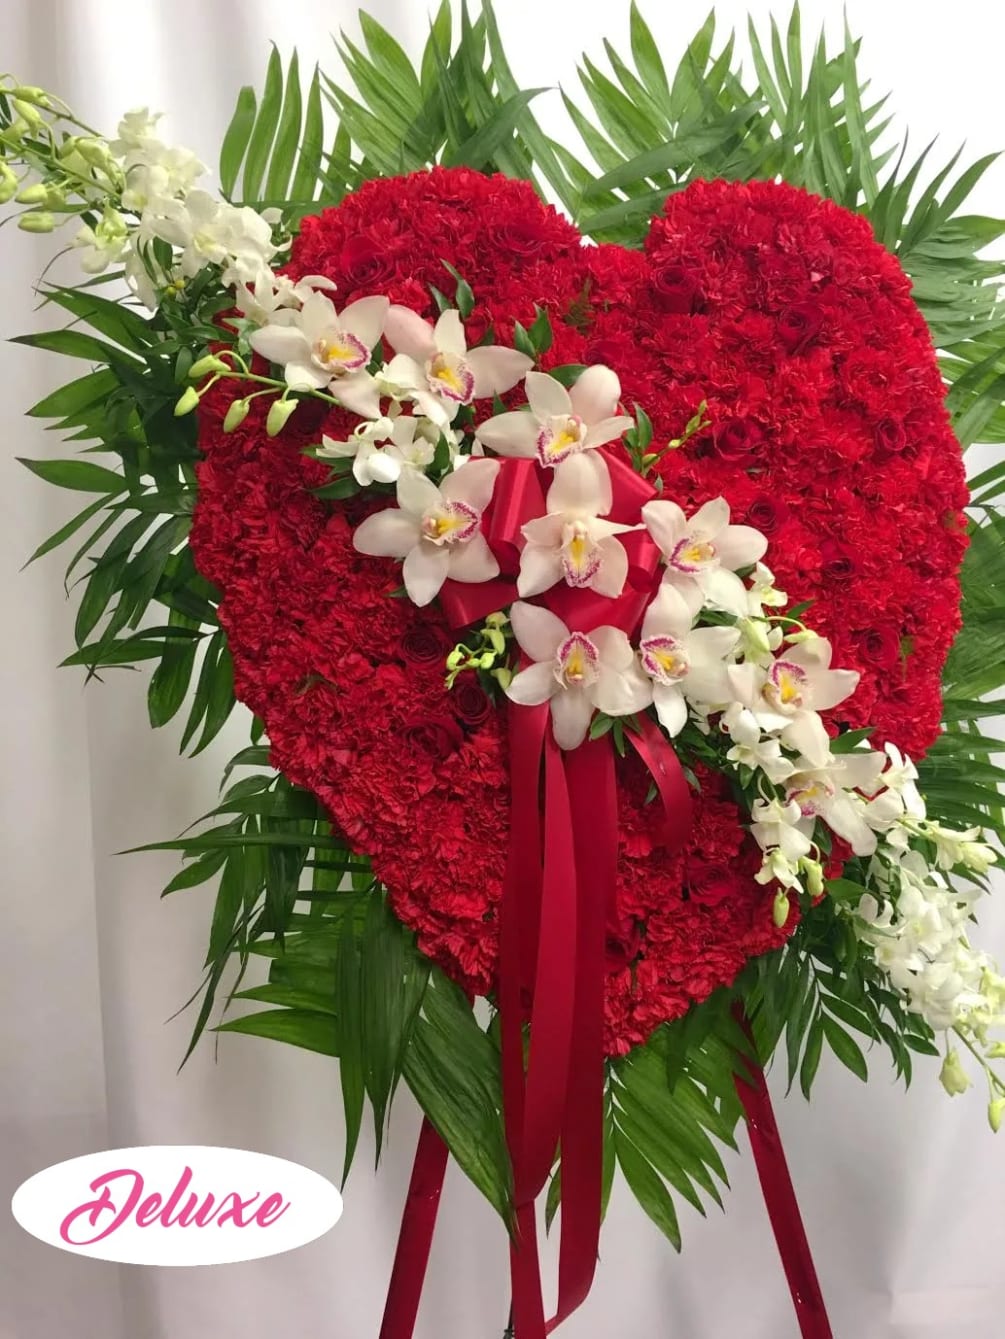 A beautiful standing heart. Solid with all red carnations and a elegant